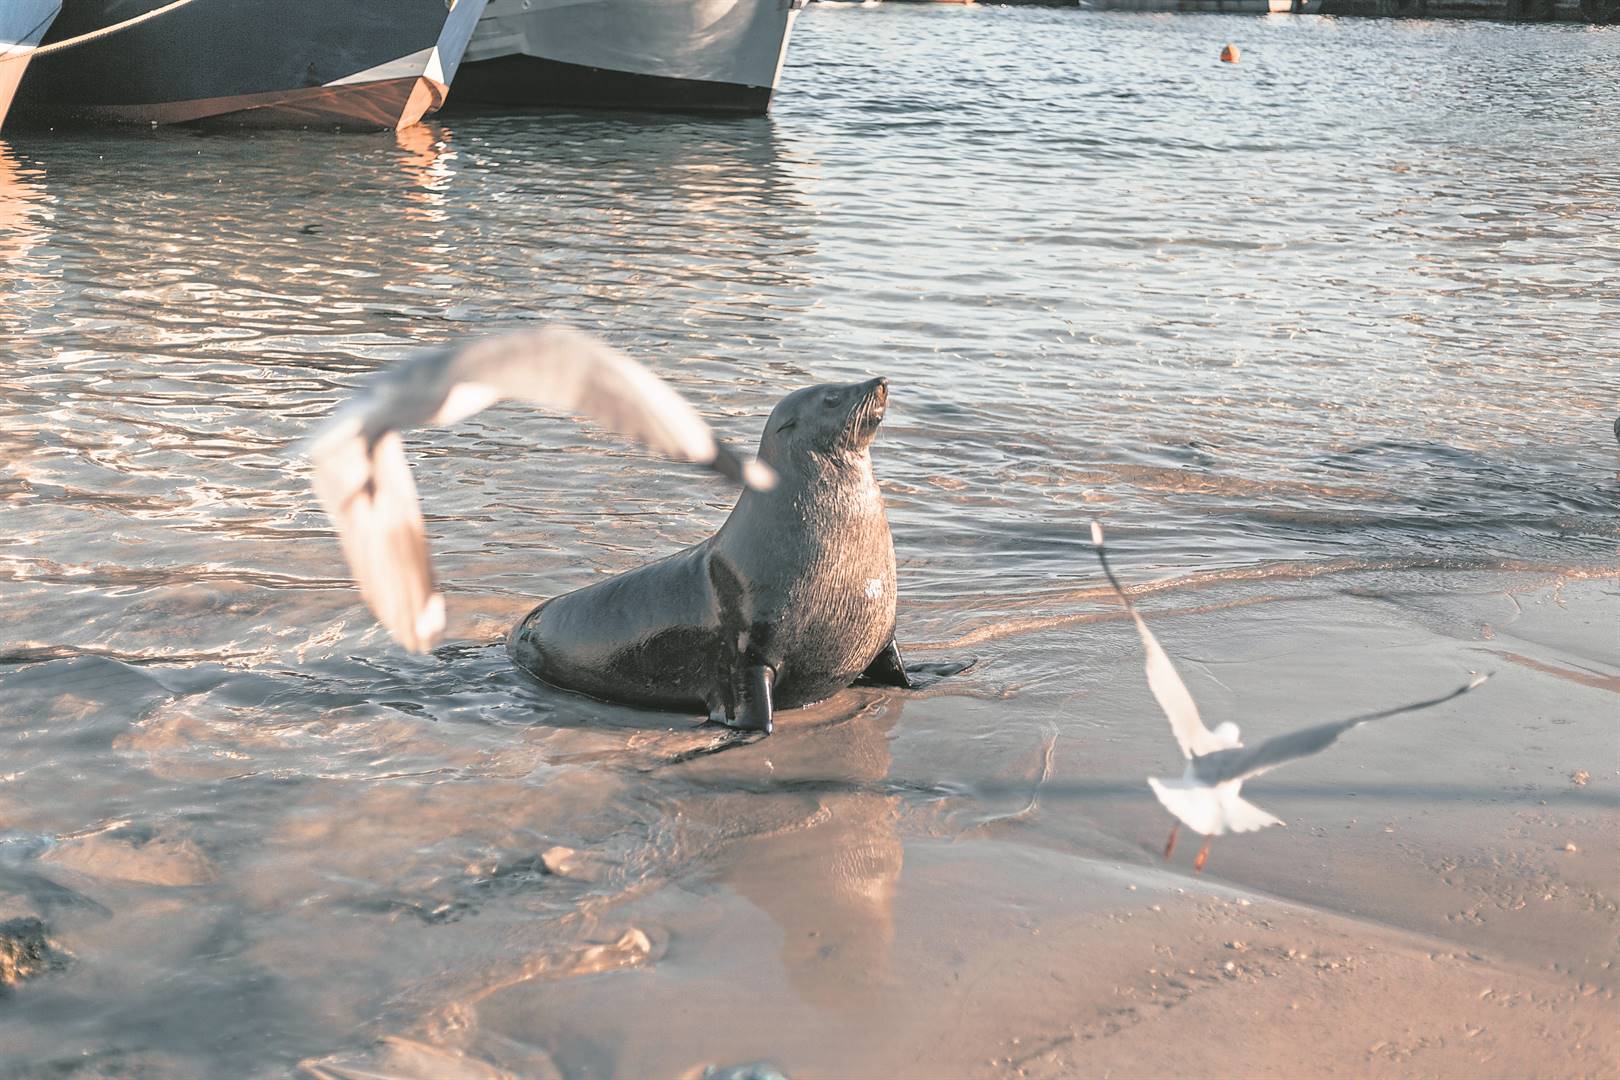 A seal bit a number divers in Cape Town on Saturday morning. (Pexels/Luke Barky)